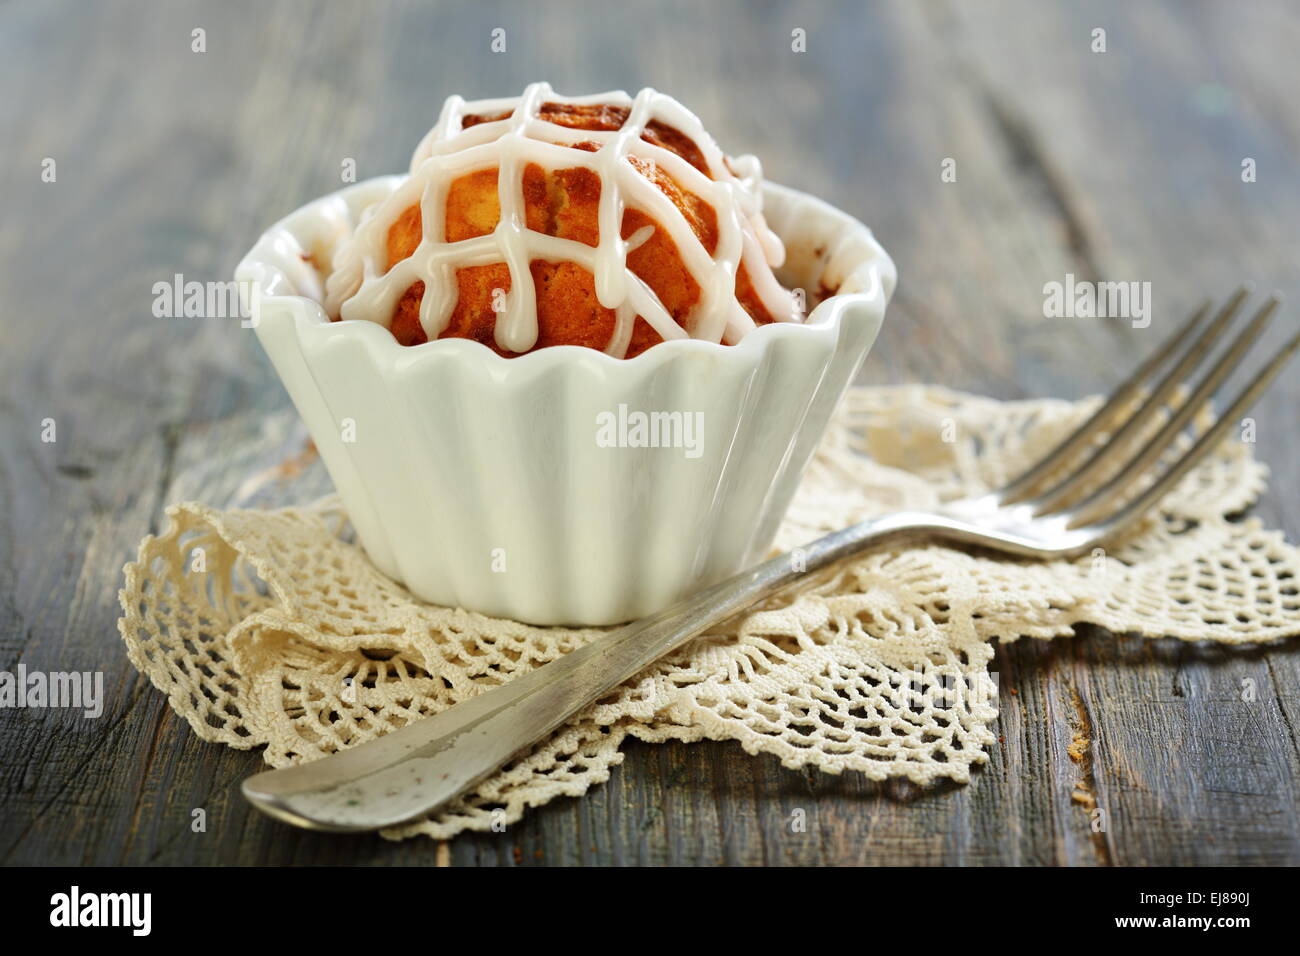 Cupcake with icing and fork. Stock Photo